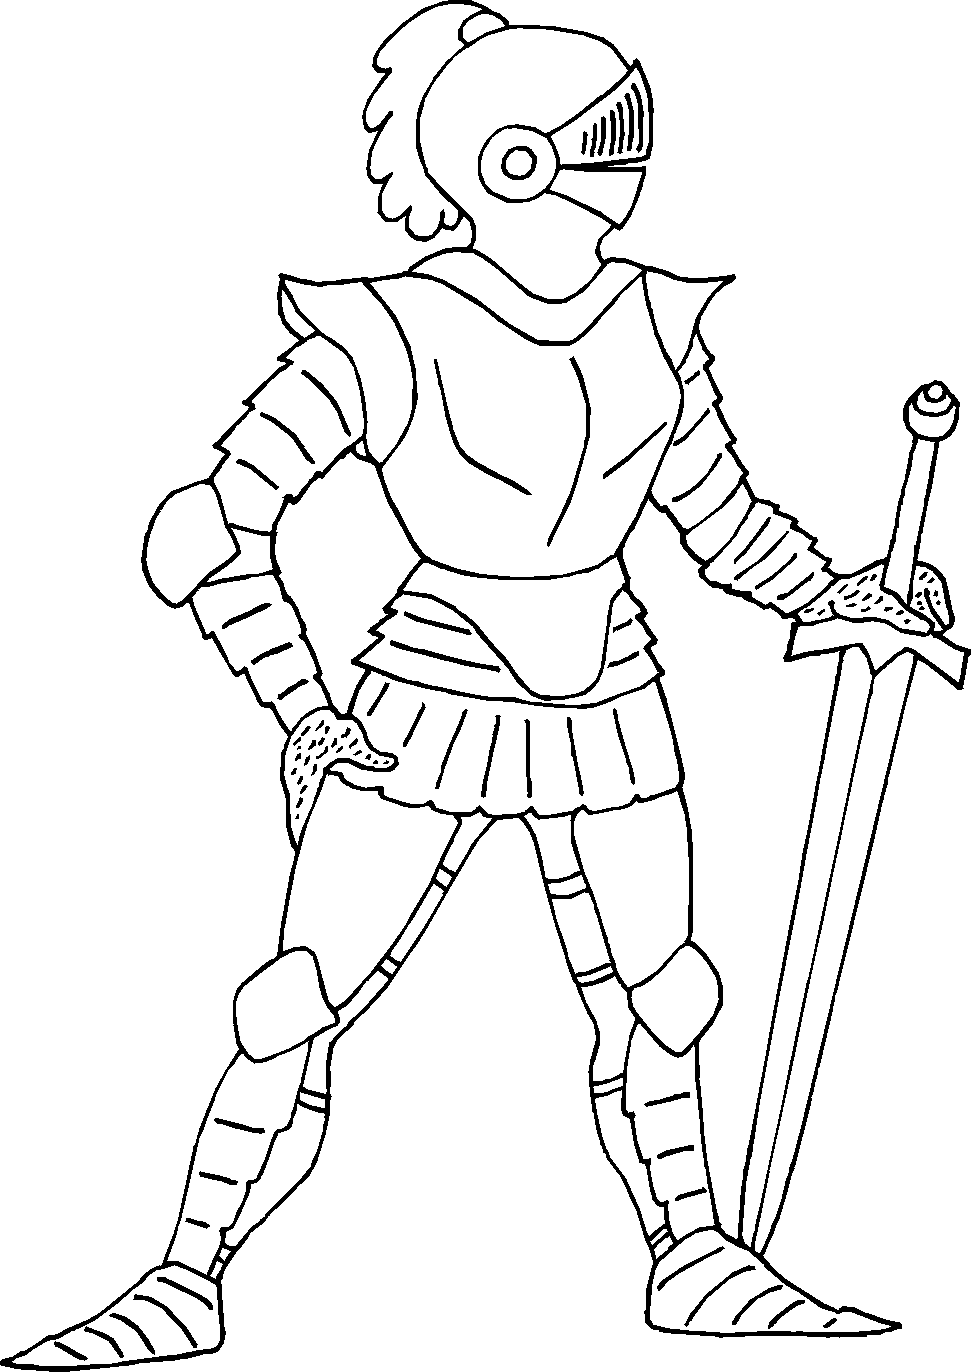 Free coloring pages of knight